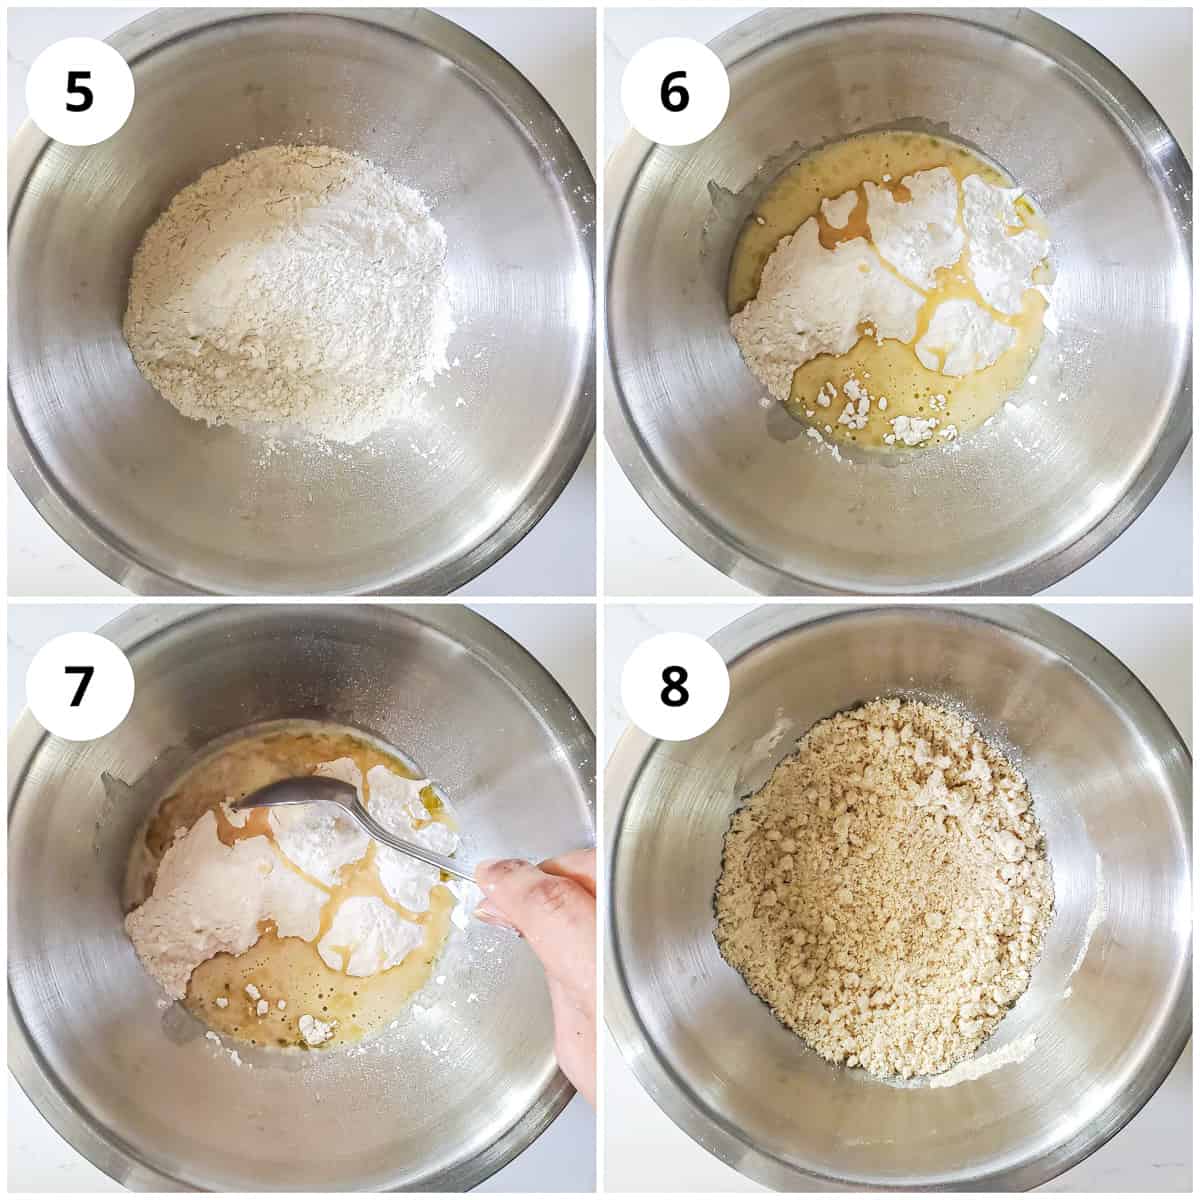 Steps for adding hot ghee to flour, mixing it to make a crumbly texture